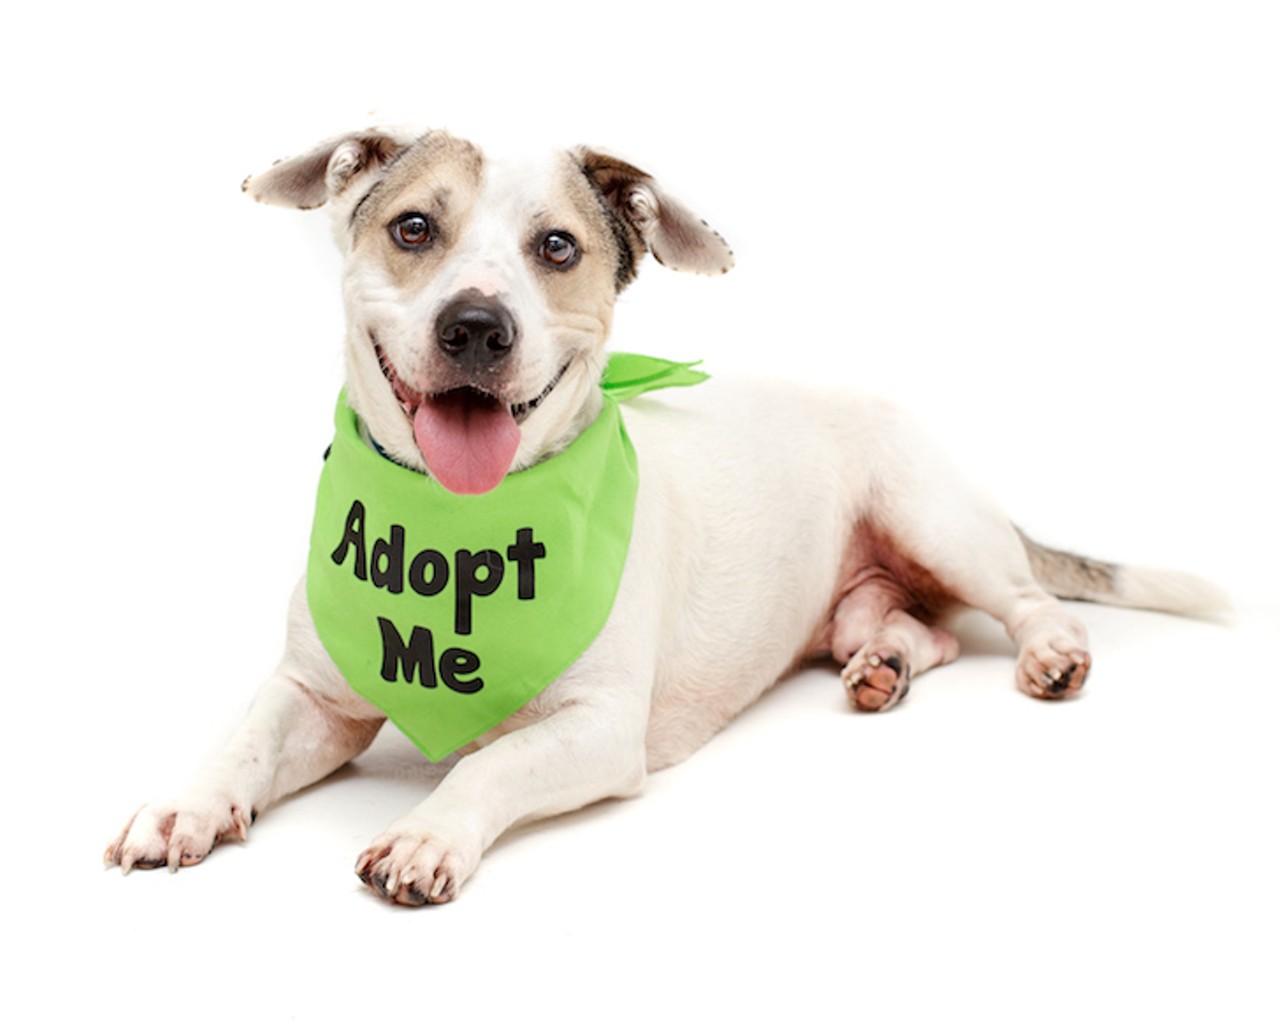 17 adoptable dogs looking for a new home right now in Orange County